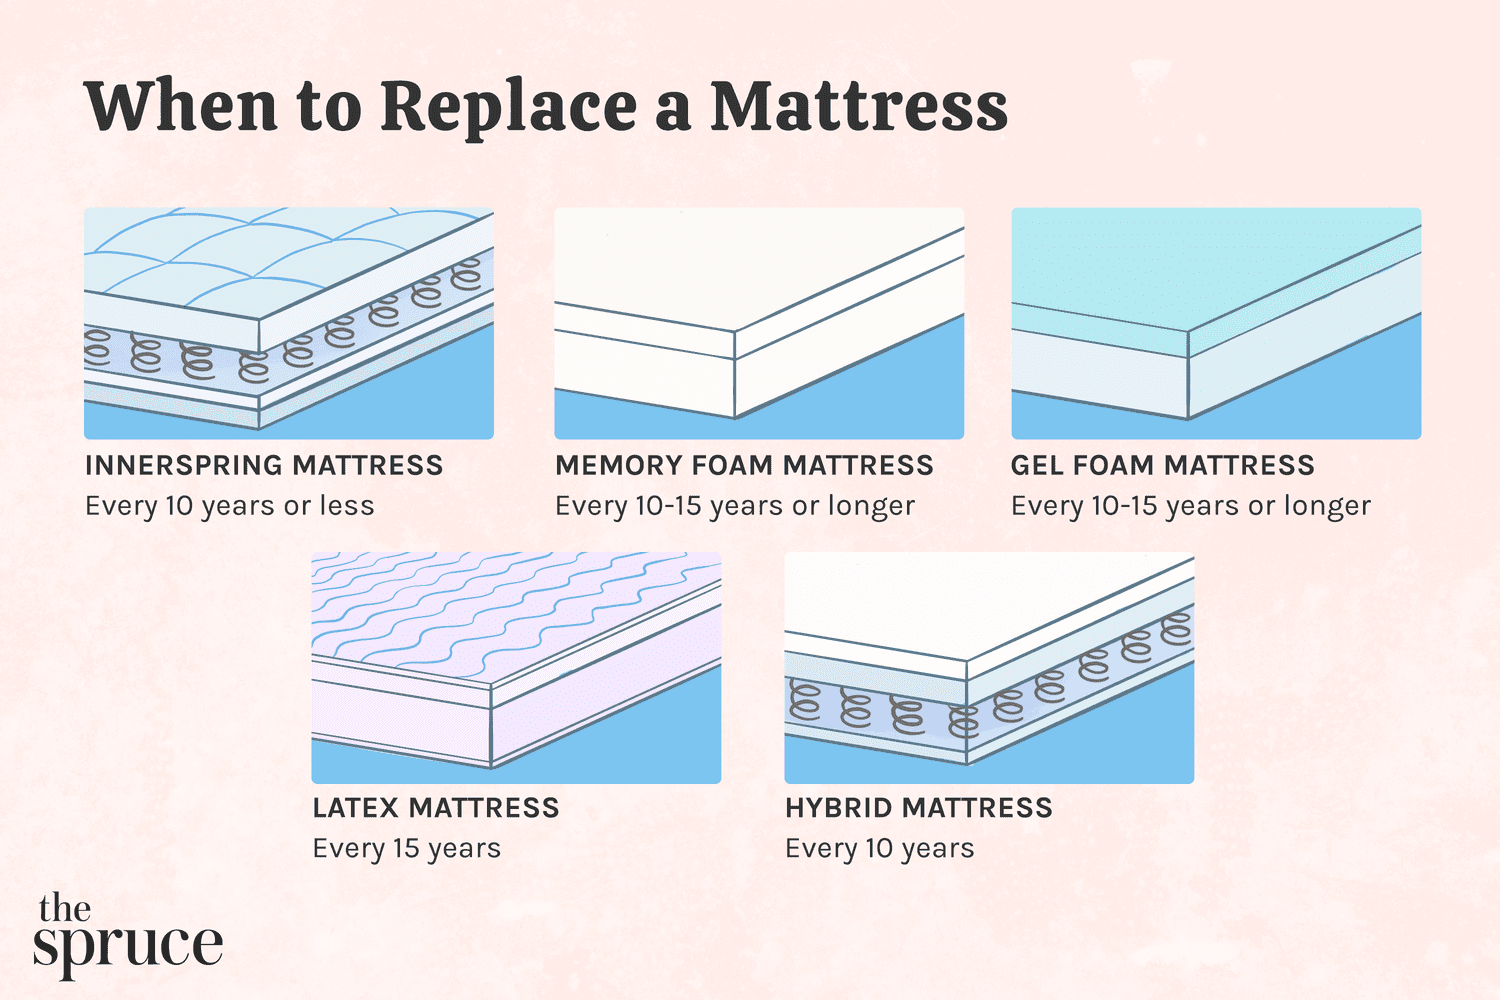 What Affects The Lifespan Of A Latex Mattress?